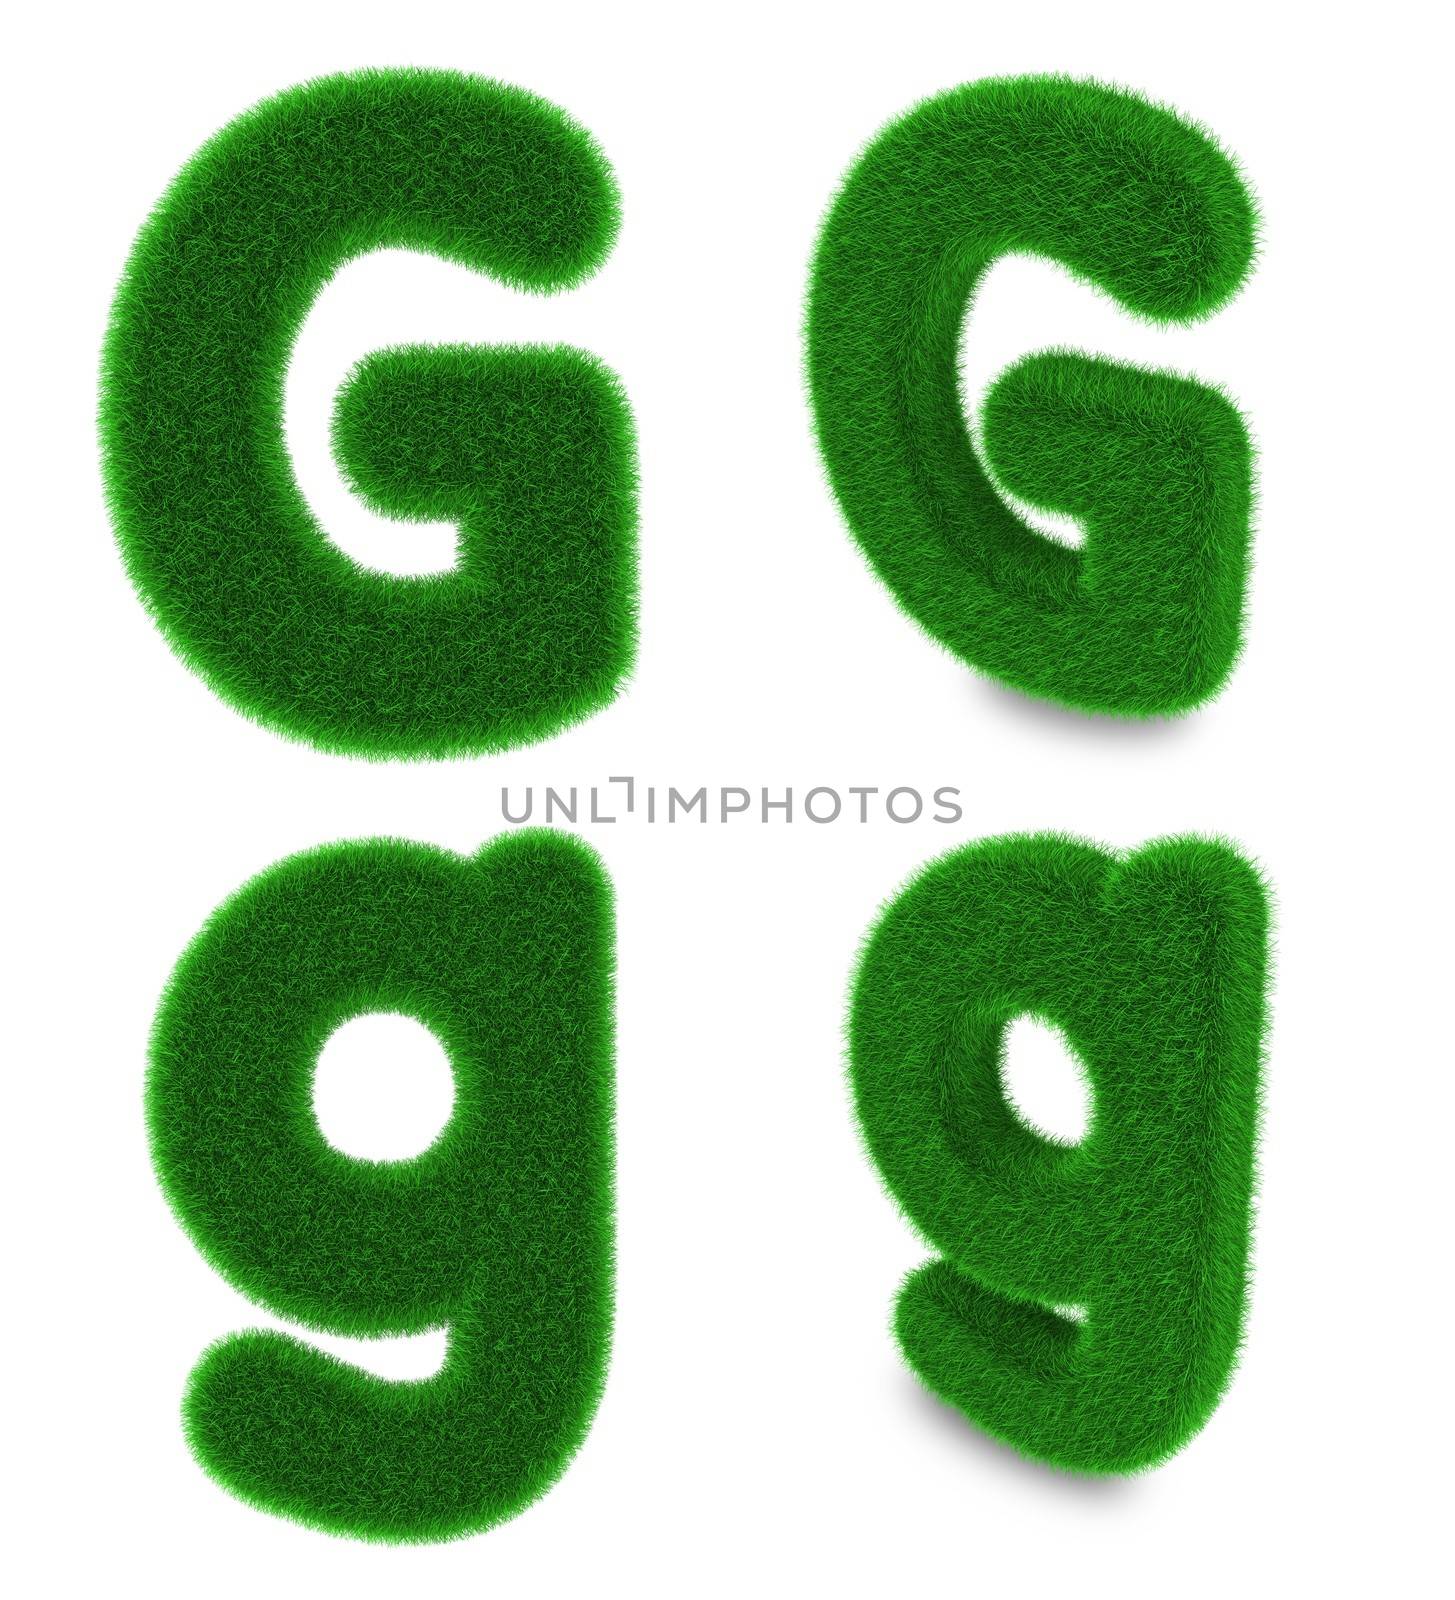 Letter G covered by green grass isolated on white background